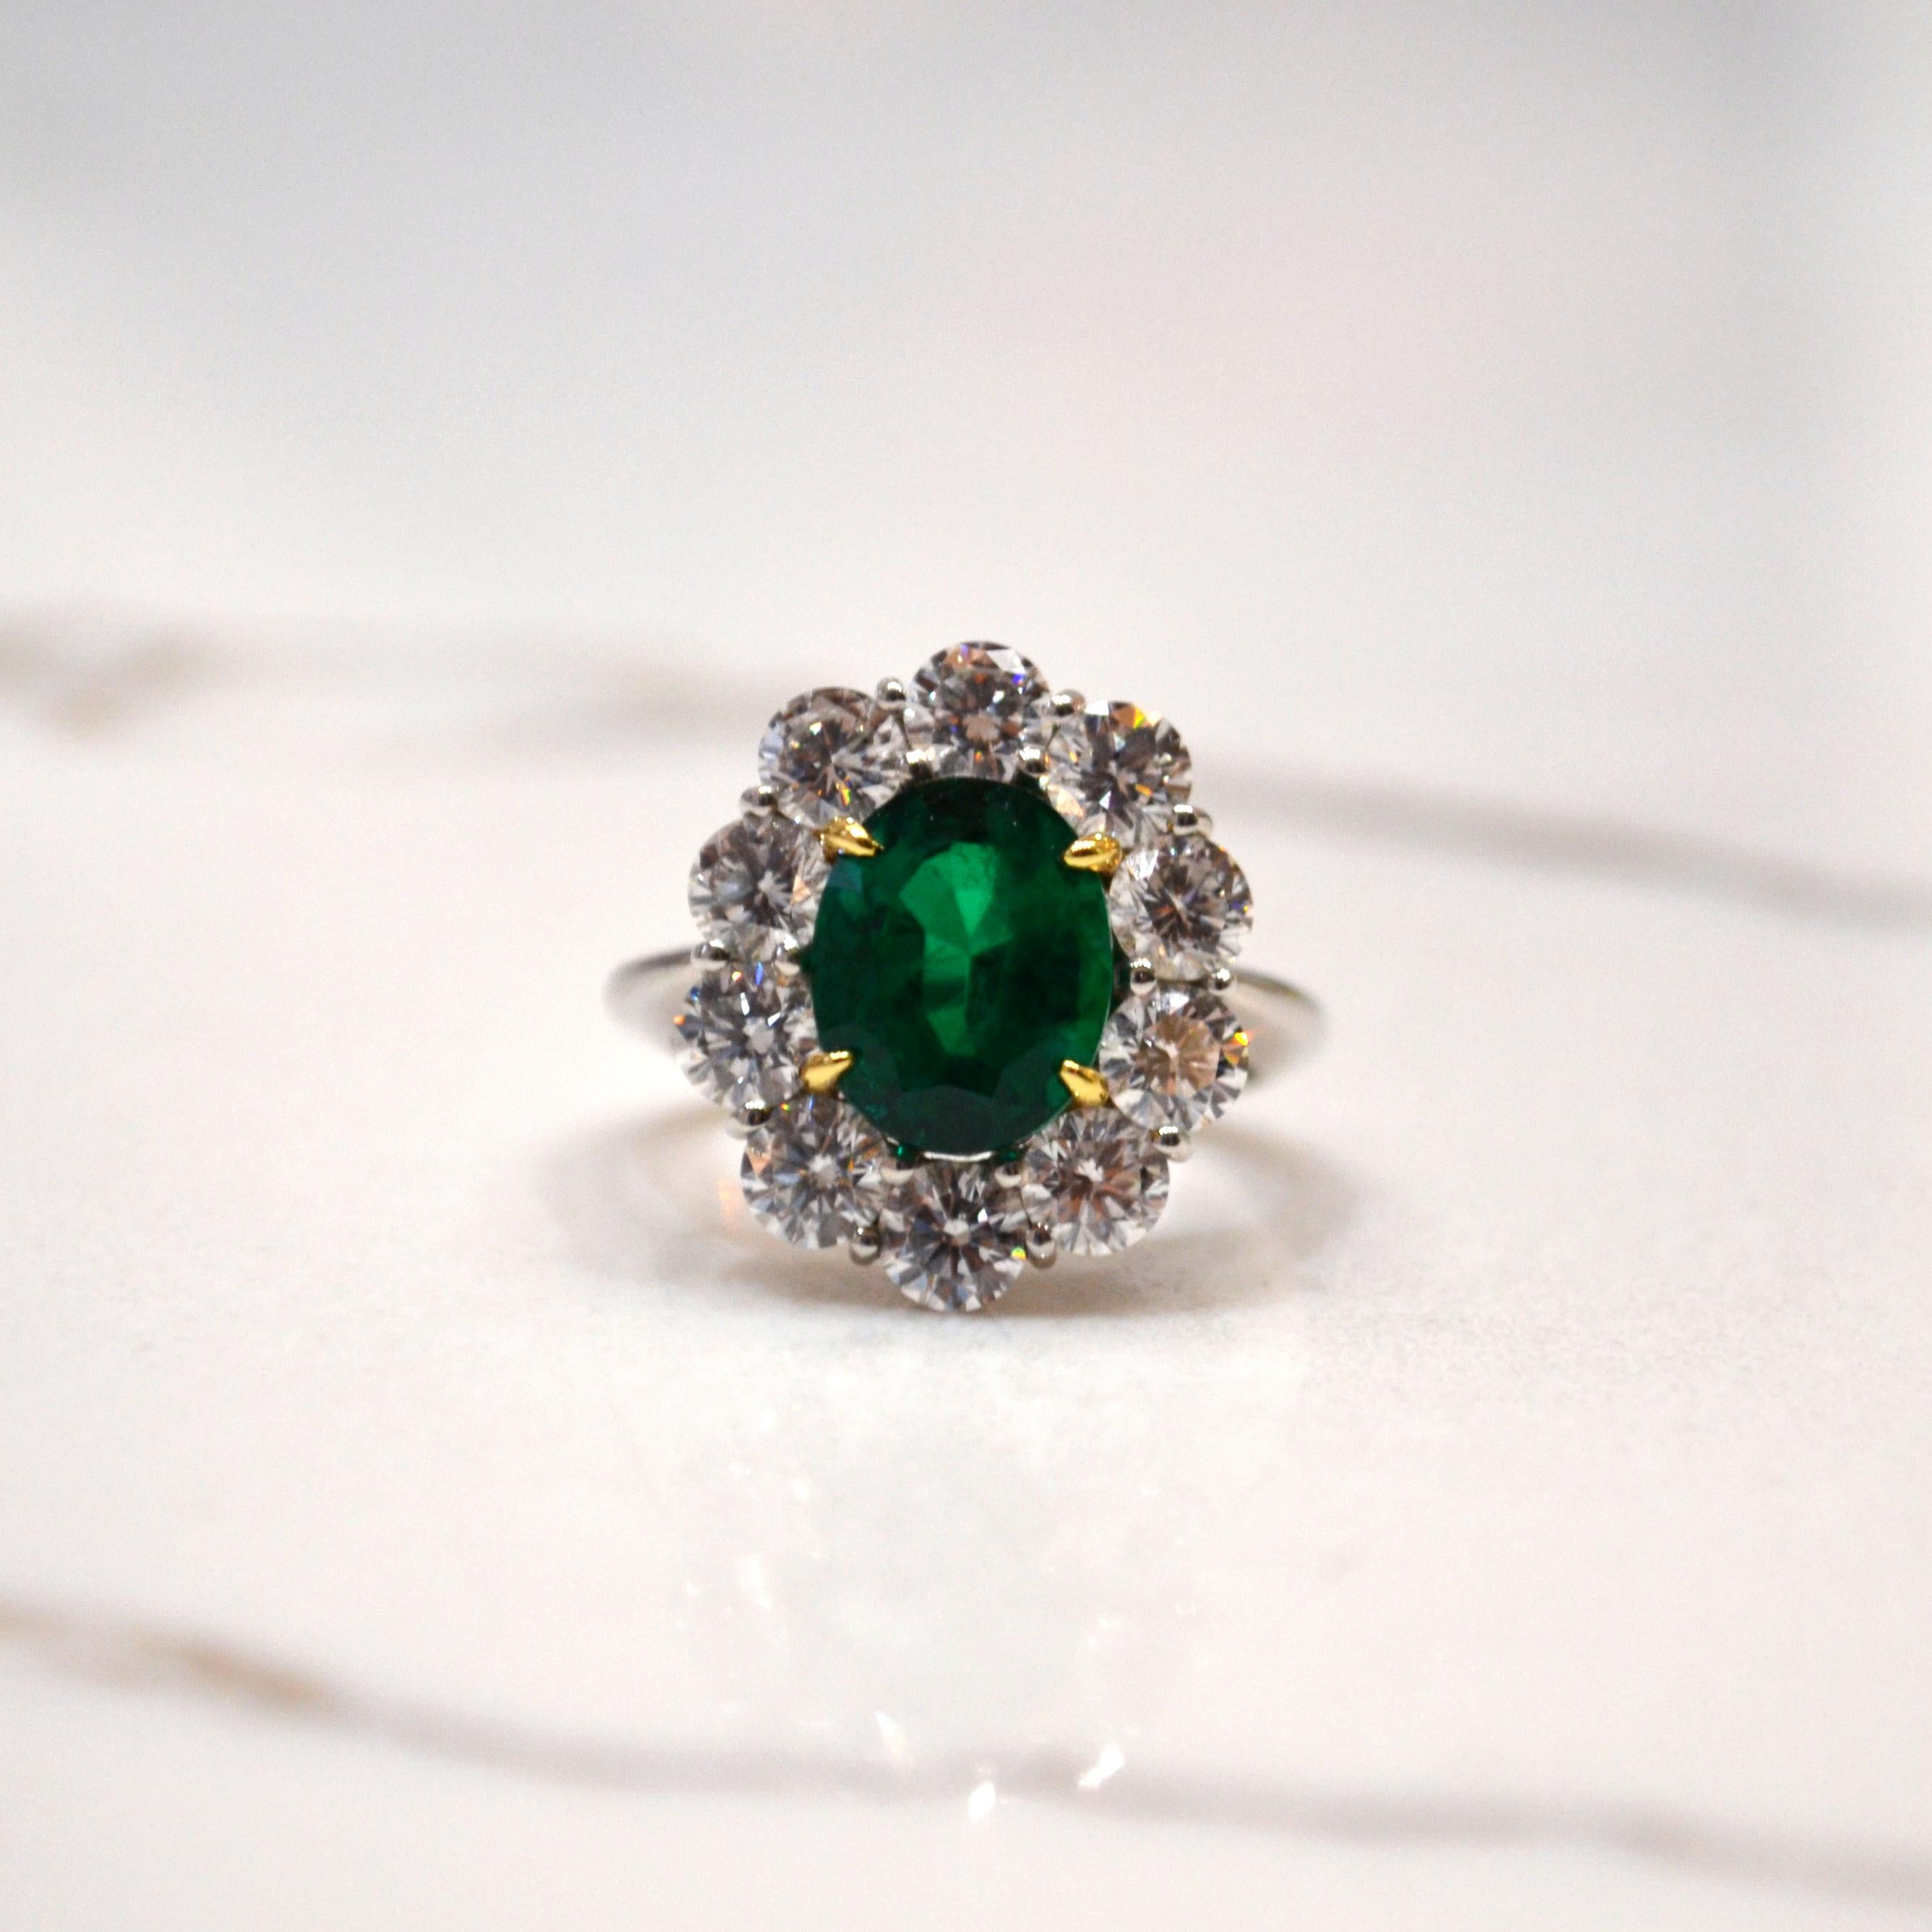 Ring in Platinum set with an oval Emerald (3.29 carat) and 10 round brilliant cut Diamonds (2.50 carat)

Includes Gemstone Report by AGTA. 
Ring US size 6
*Complimentary resizing service*
